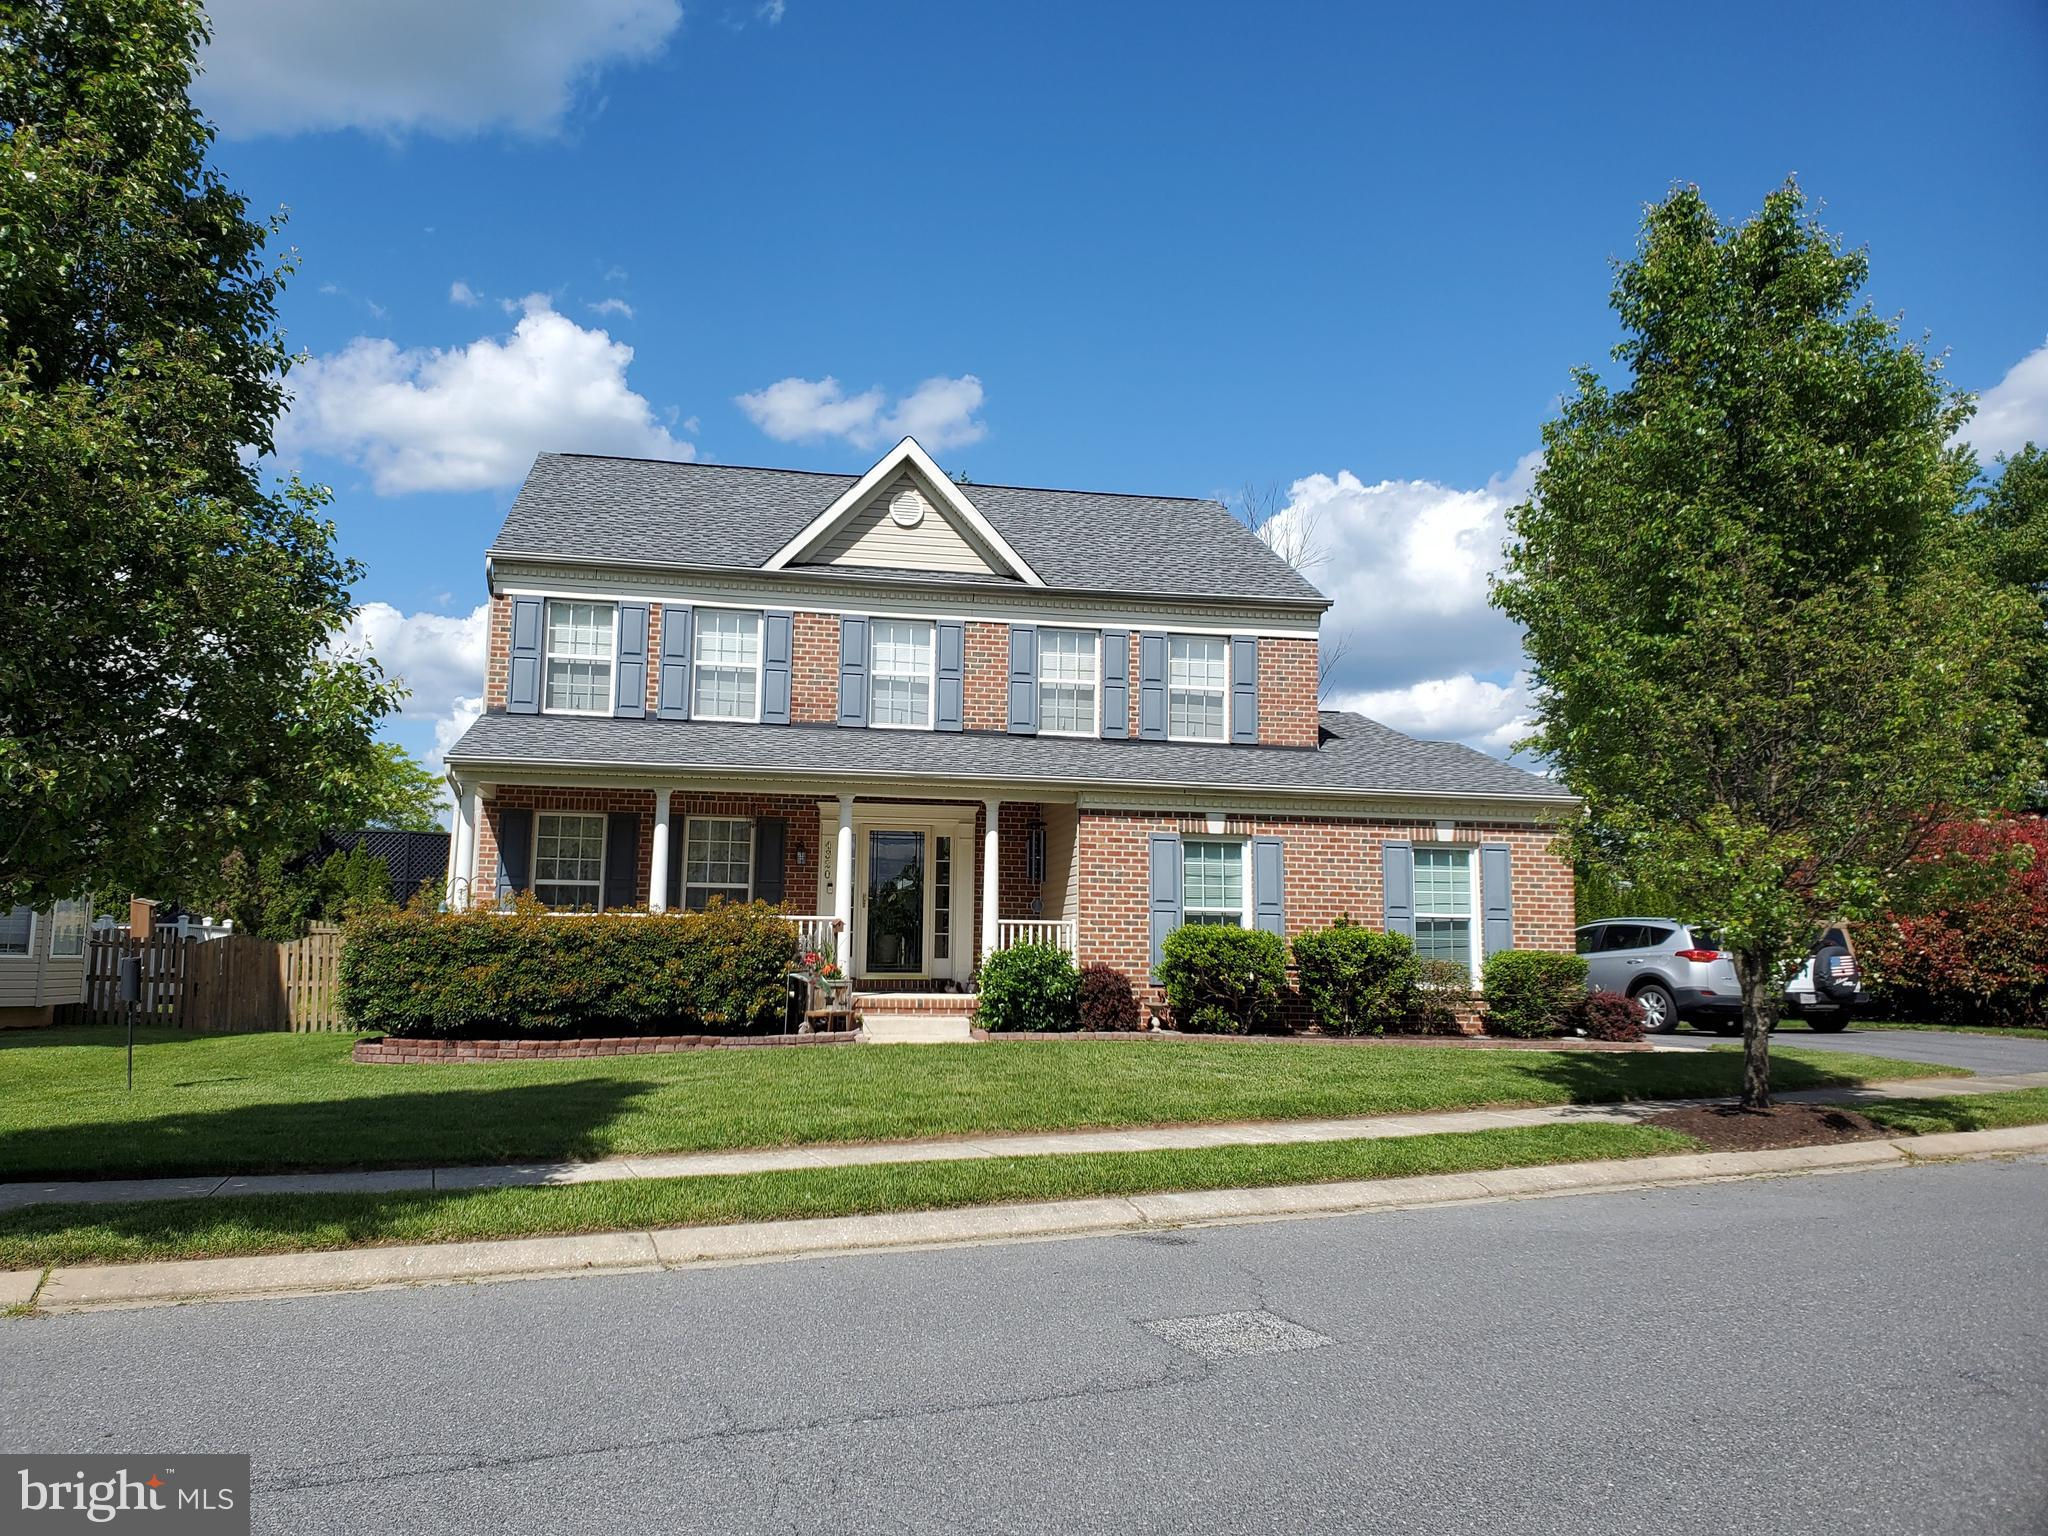 4320 Florio Drive, Perry Hall, MD 21128